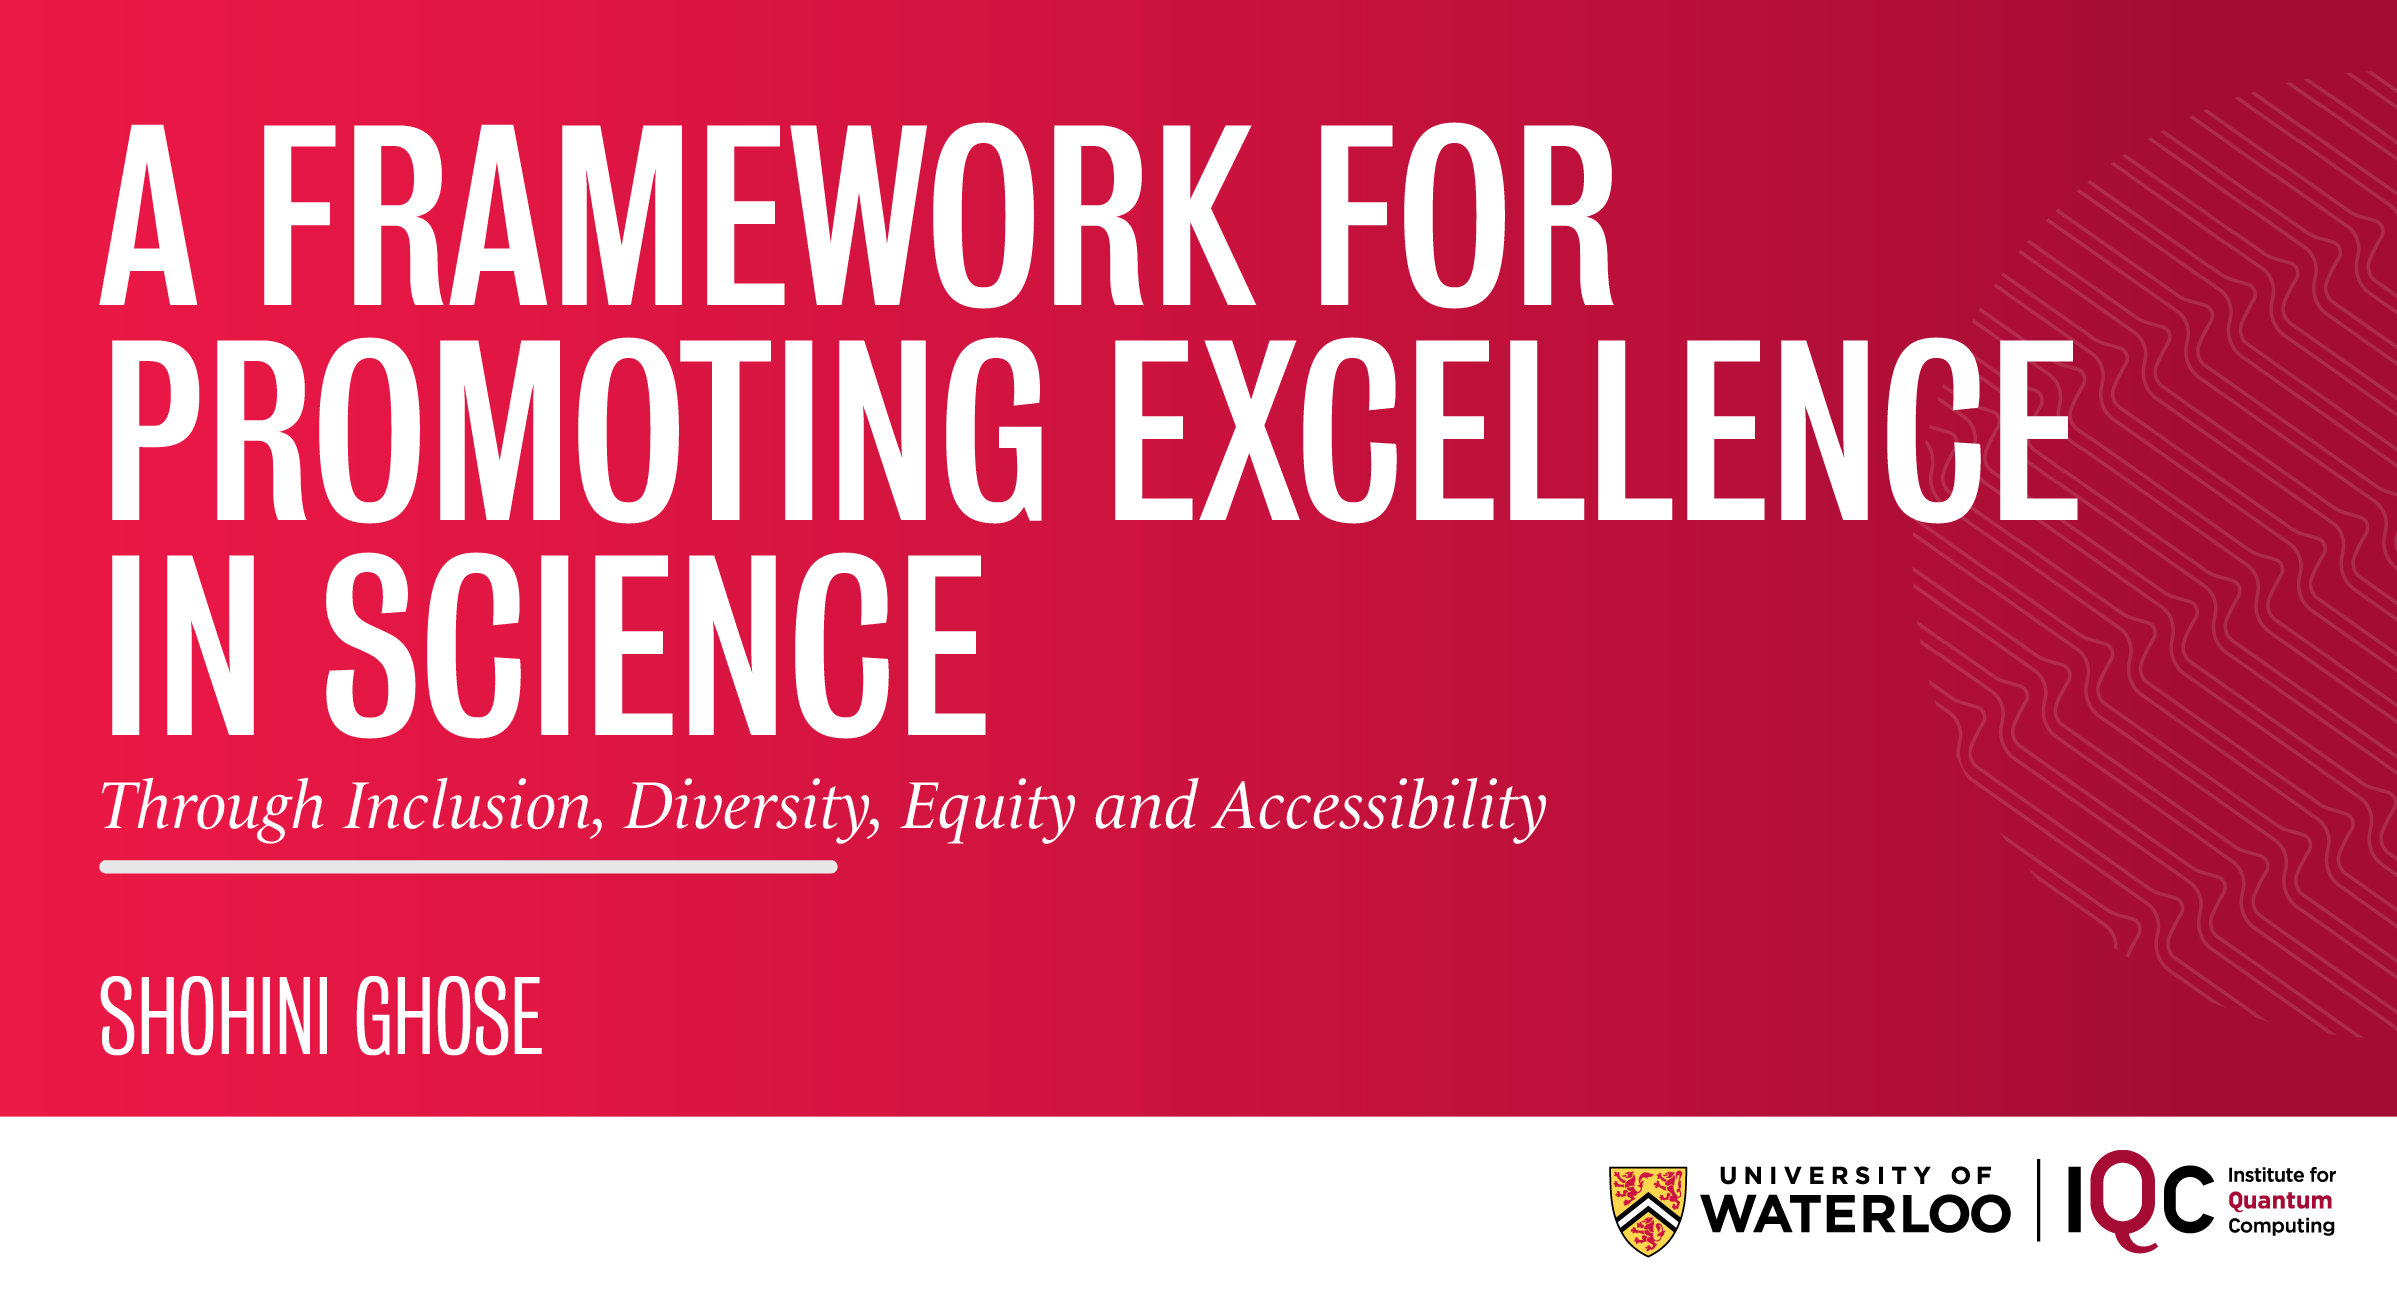 Shohini Ghose – A framework for promoting excellence in science through Inclusion, Diversity, Equity and Accessibility